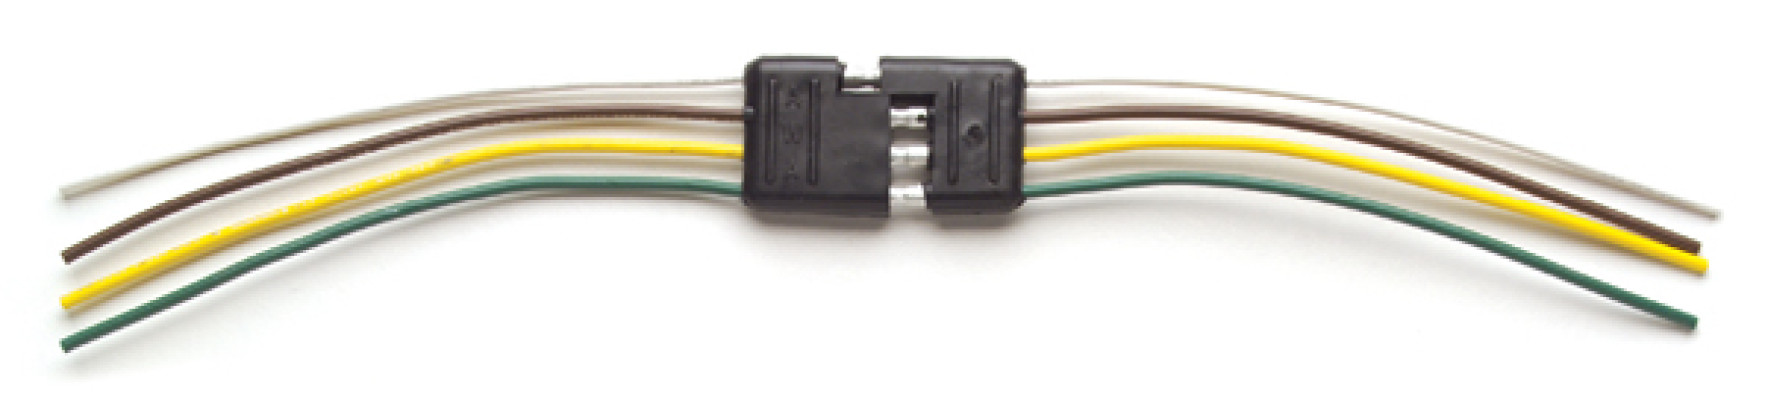 Image of Flat Connector, 4 Pole, 16 Ga from Grote. Part number: 82-1030